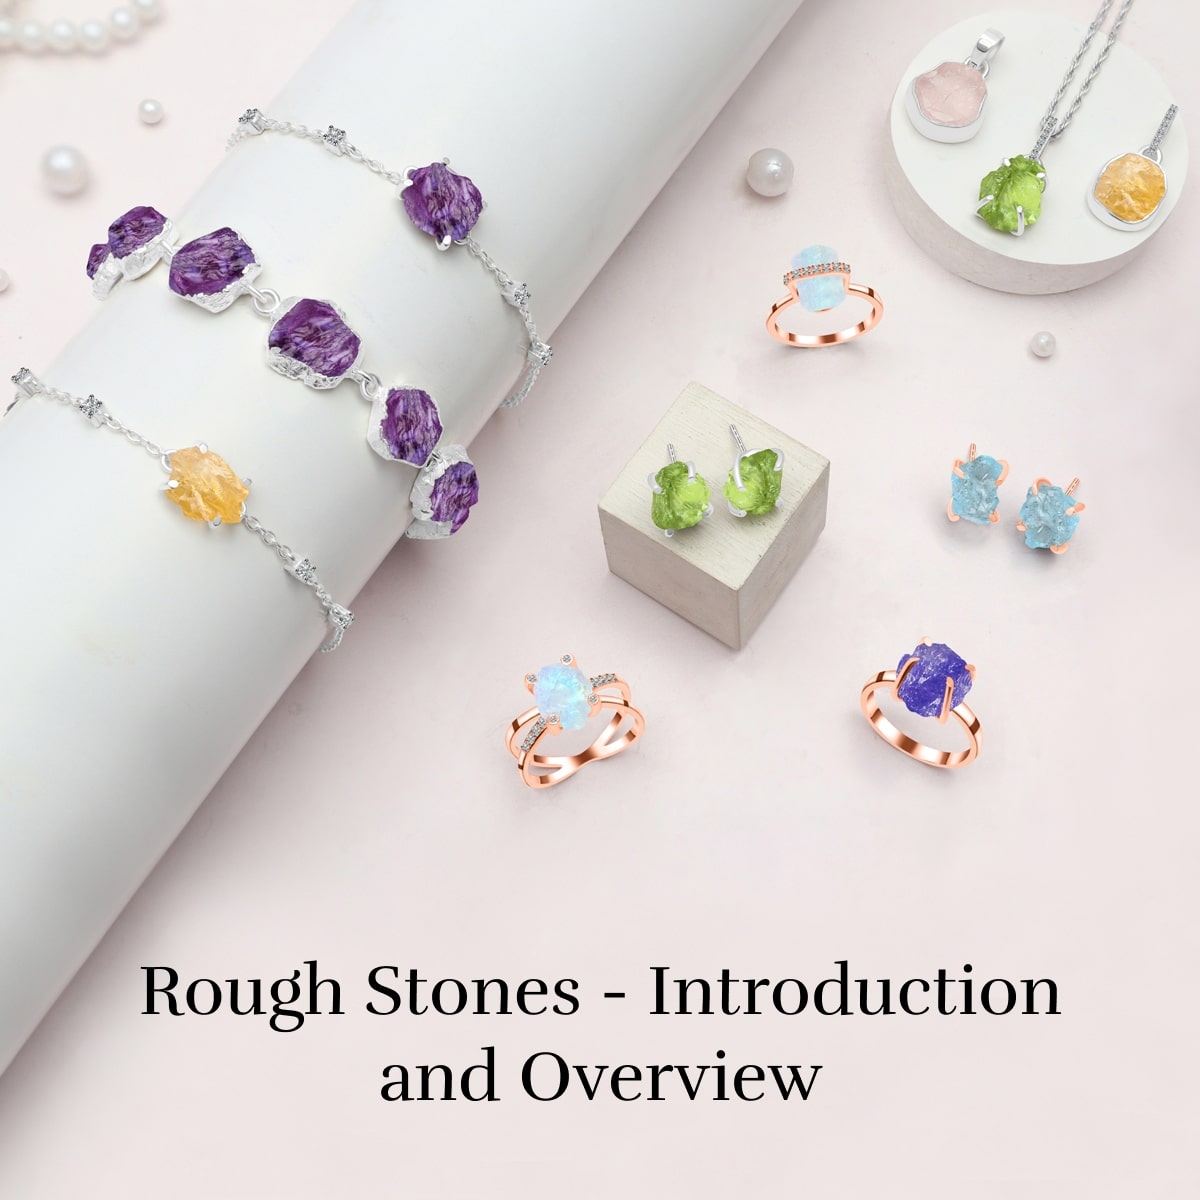 What are Rough Stones